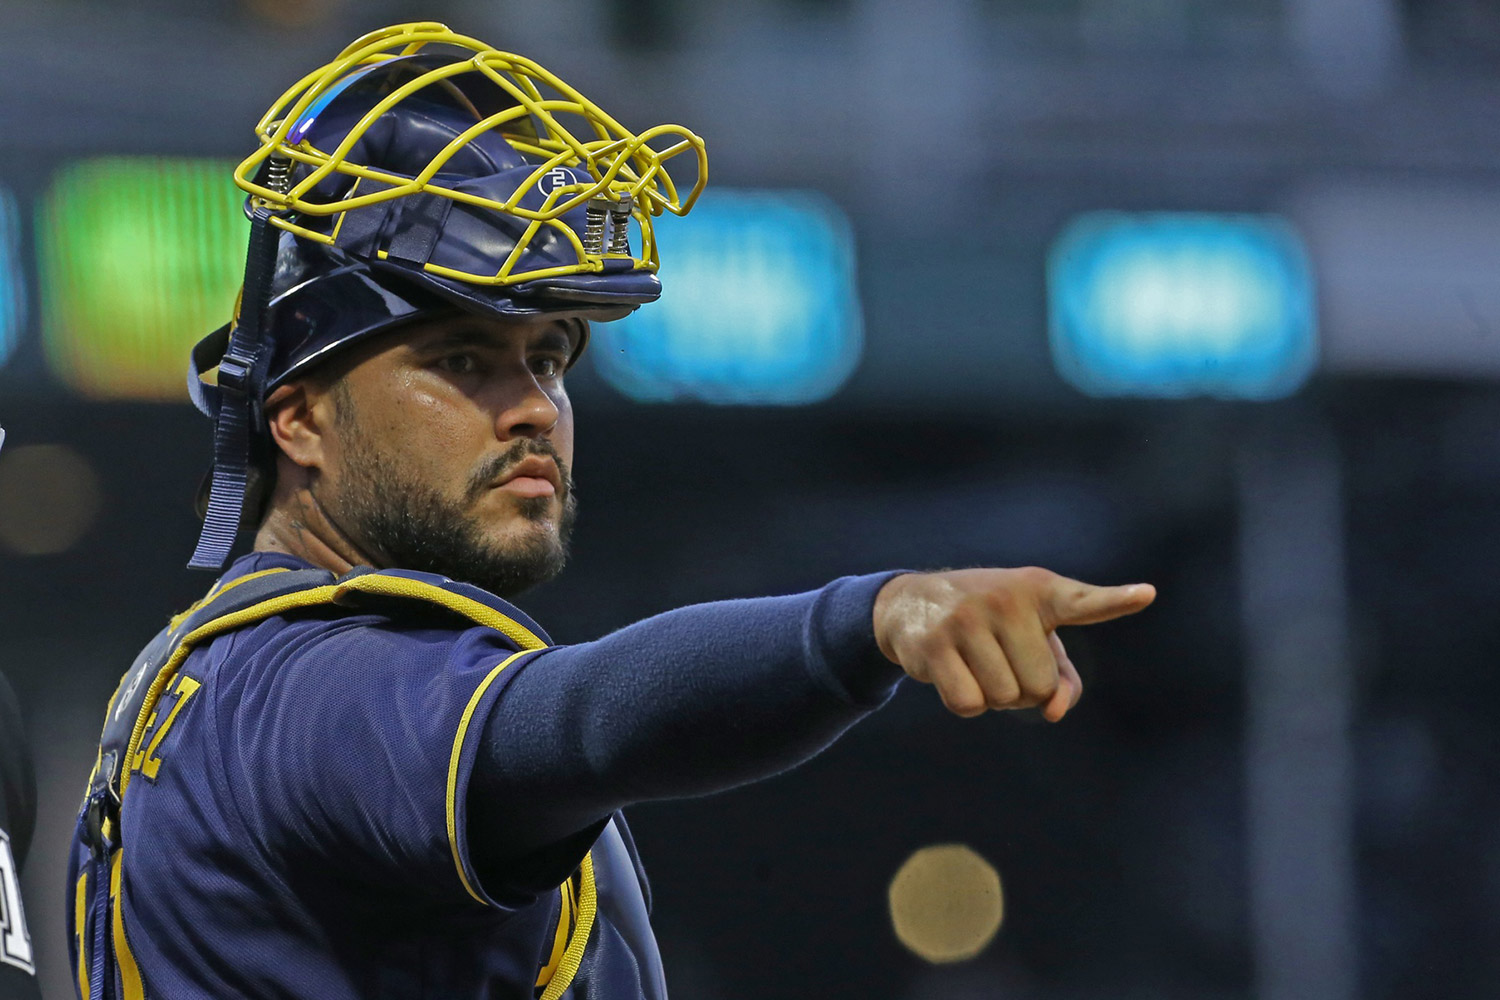 Grading The Brewers Offseason Moves the Crew Didn't Make This Winter